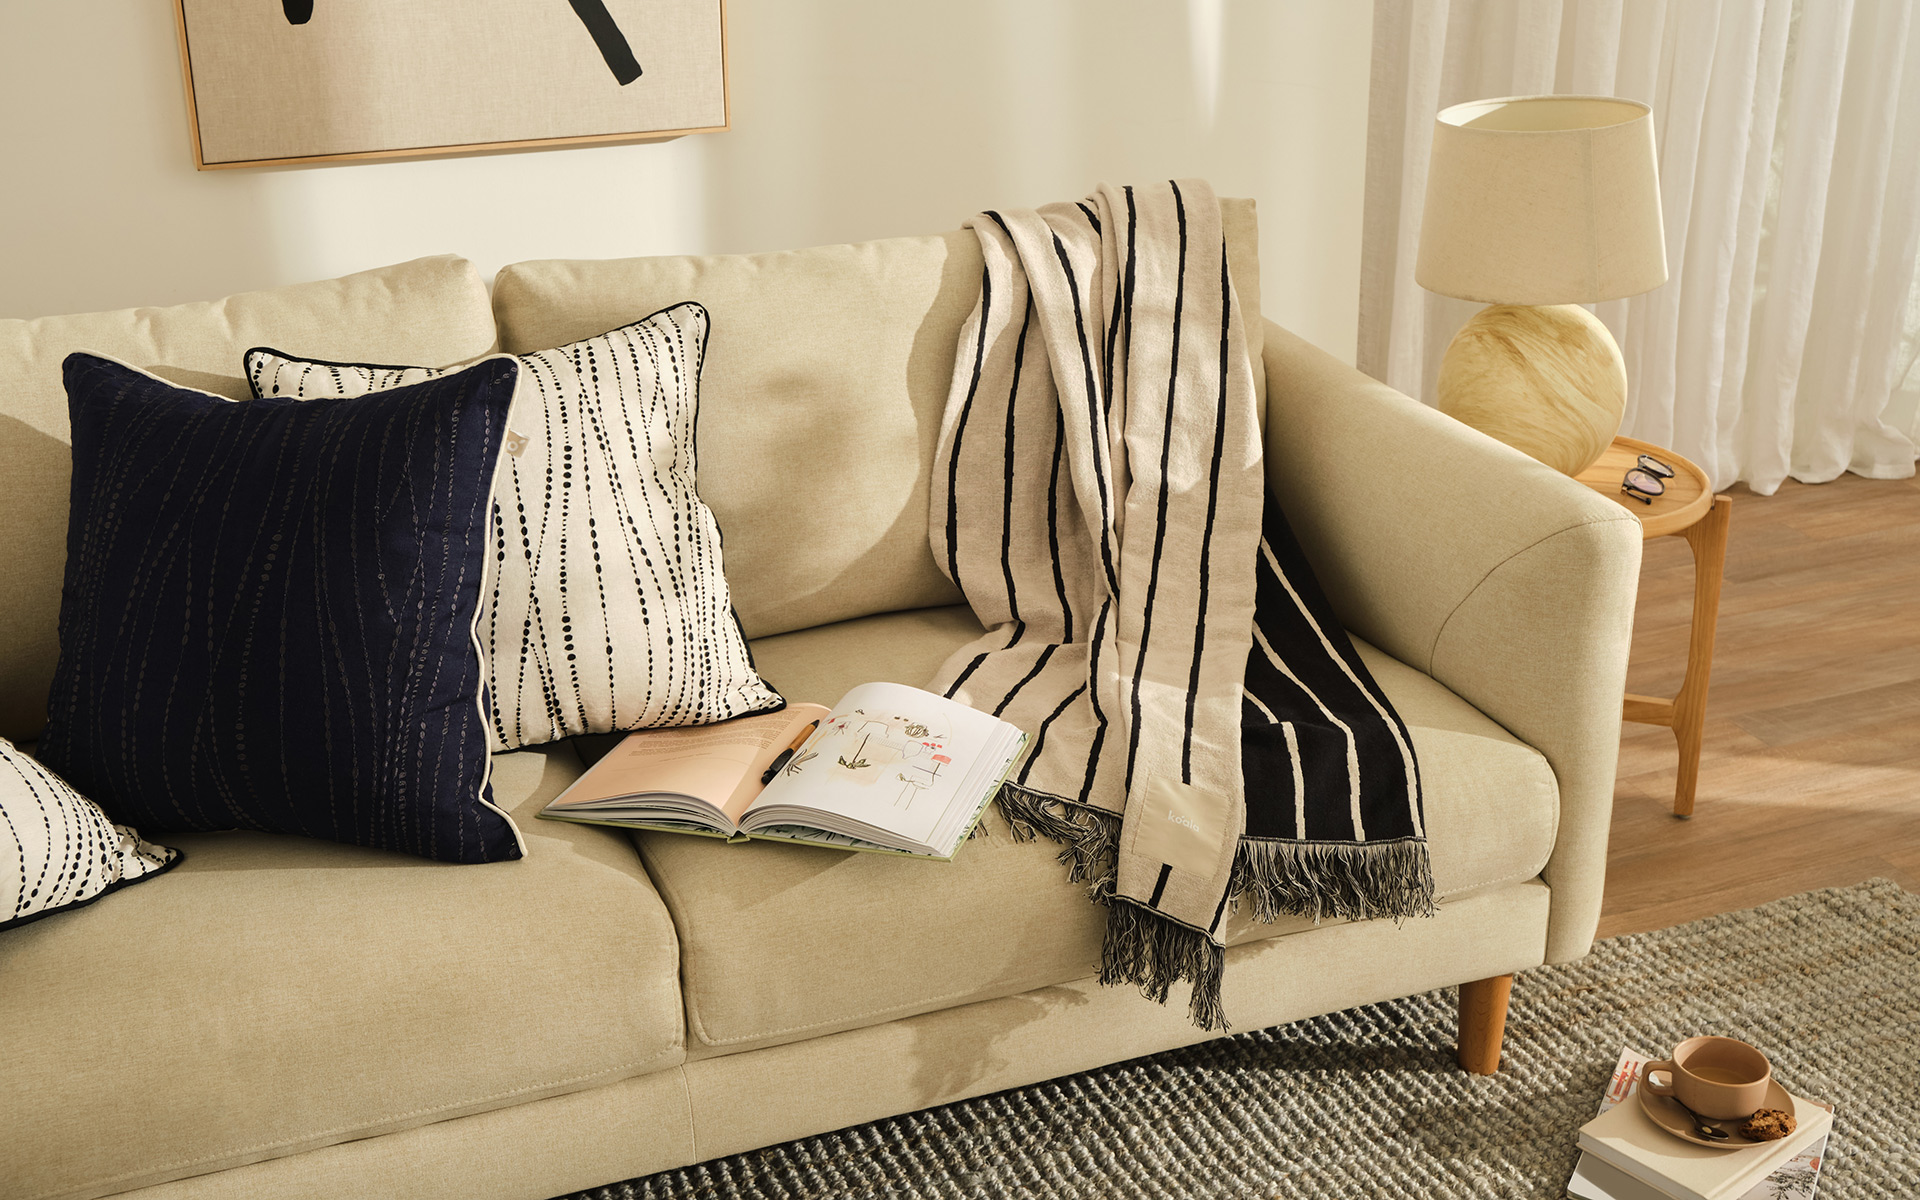 Koala’s cushions and throws adds a sophisticated touch to a coastal Hamptons style living room 